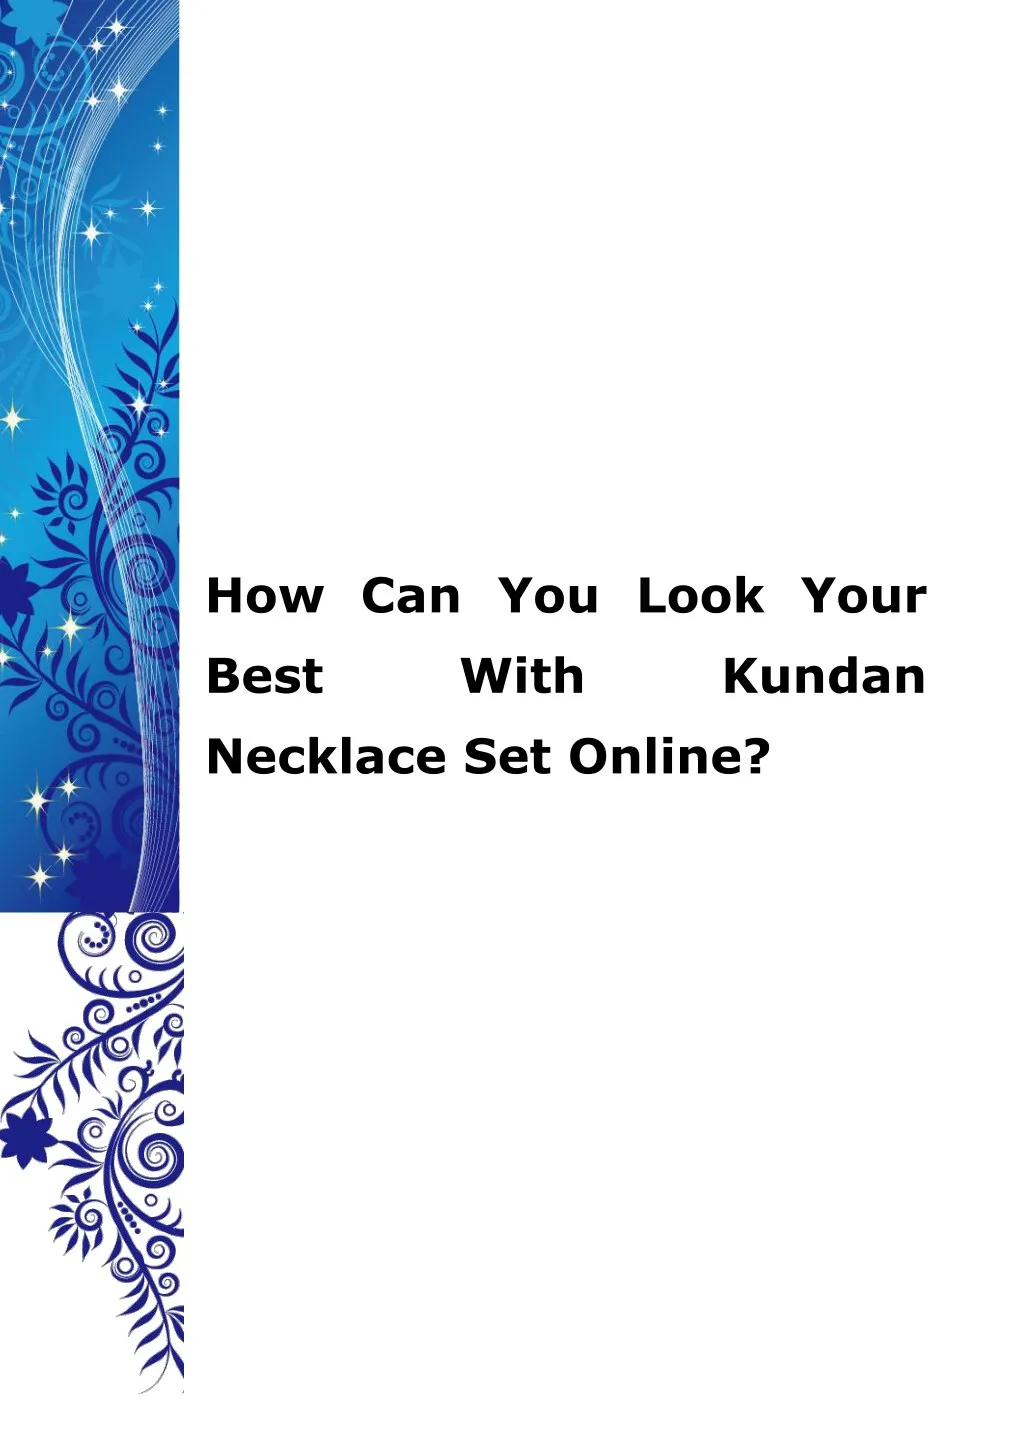 how can you look your best with necklace